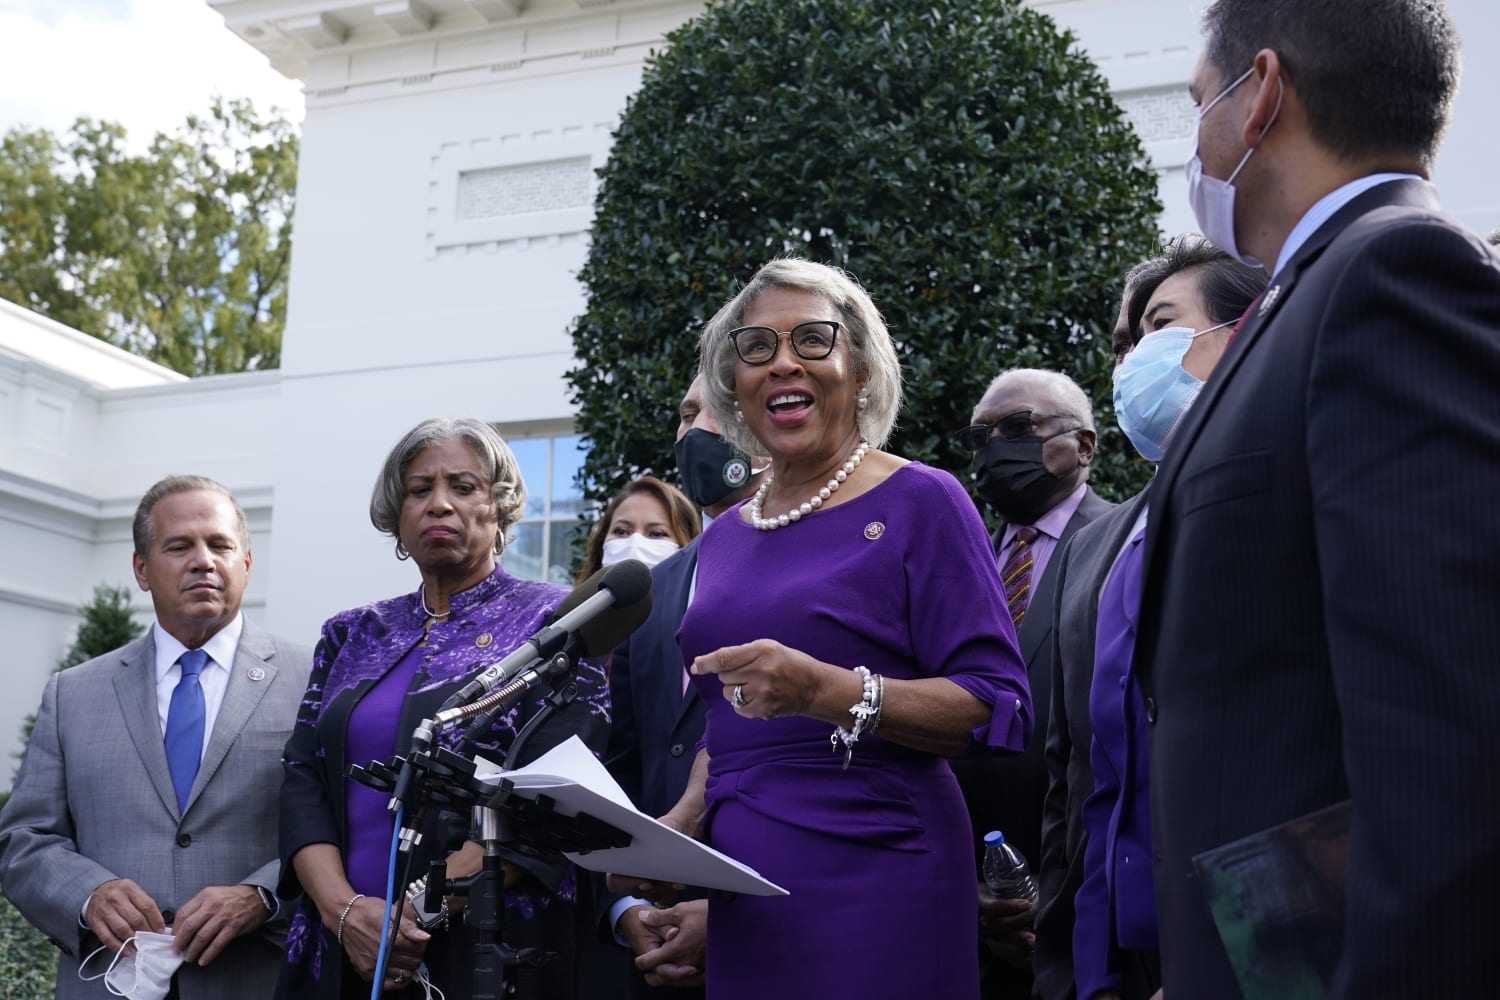 Black Caucus chair says spending bill will fund top priorities, including HBCUs and housing